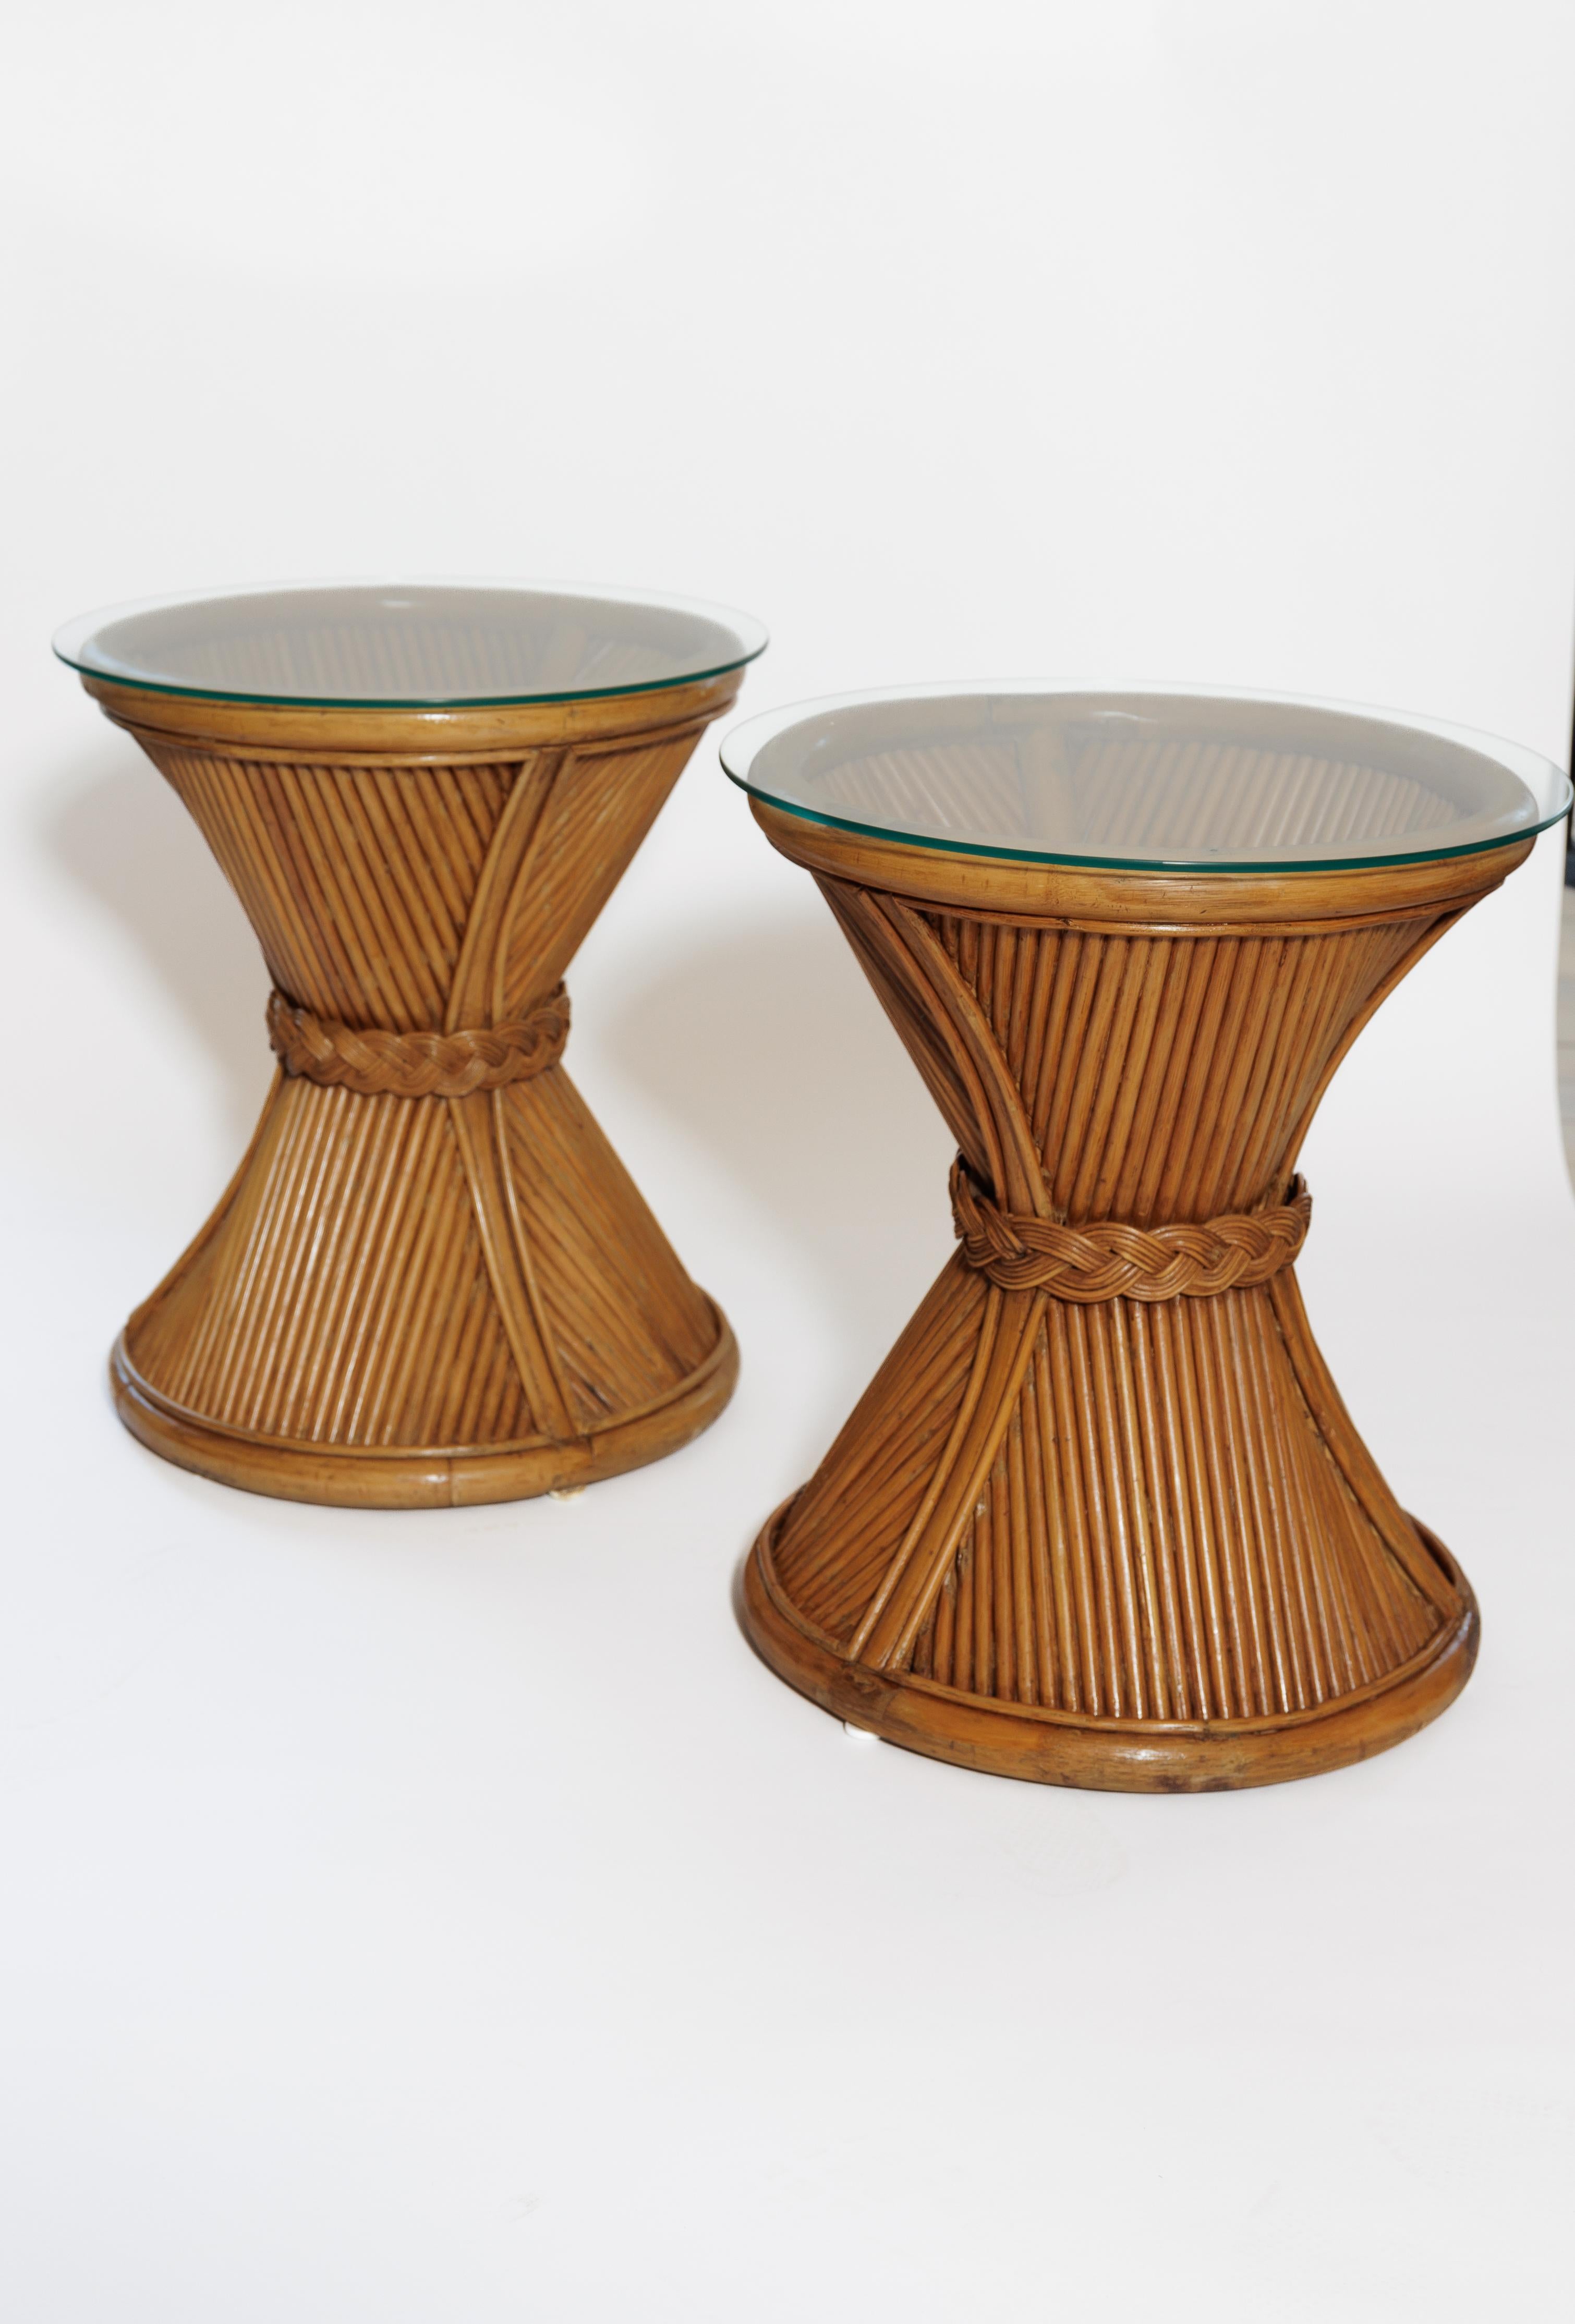 Pair of Bamboo Circular Side Tables with Glass Tops In Excellent Condition For Sale In Bridgehampton, NY